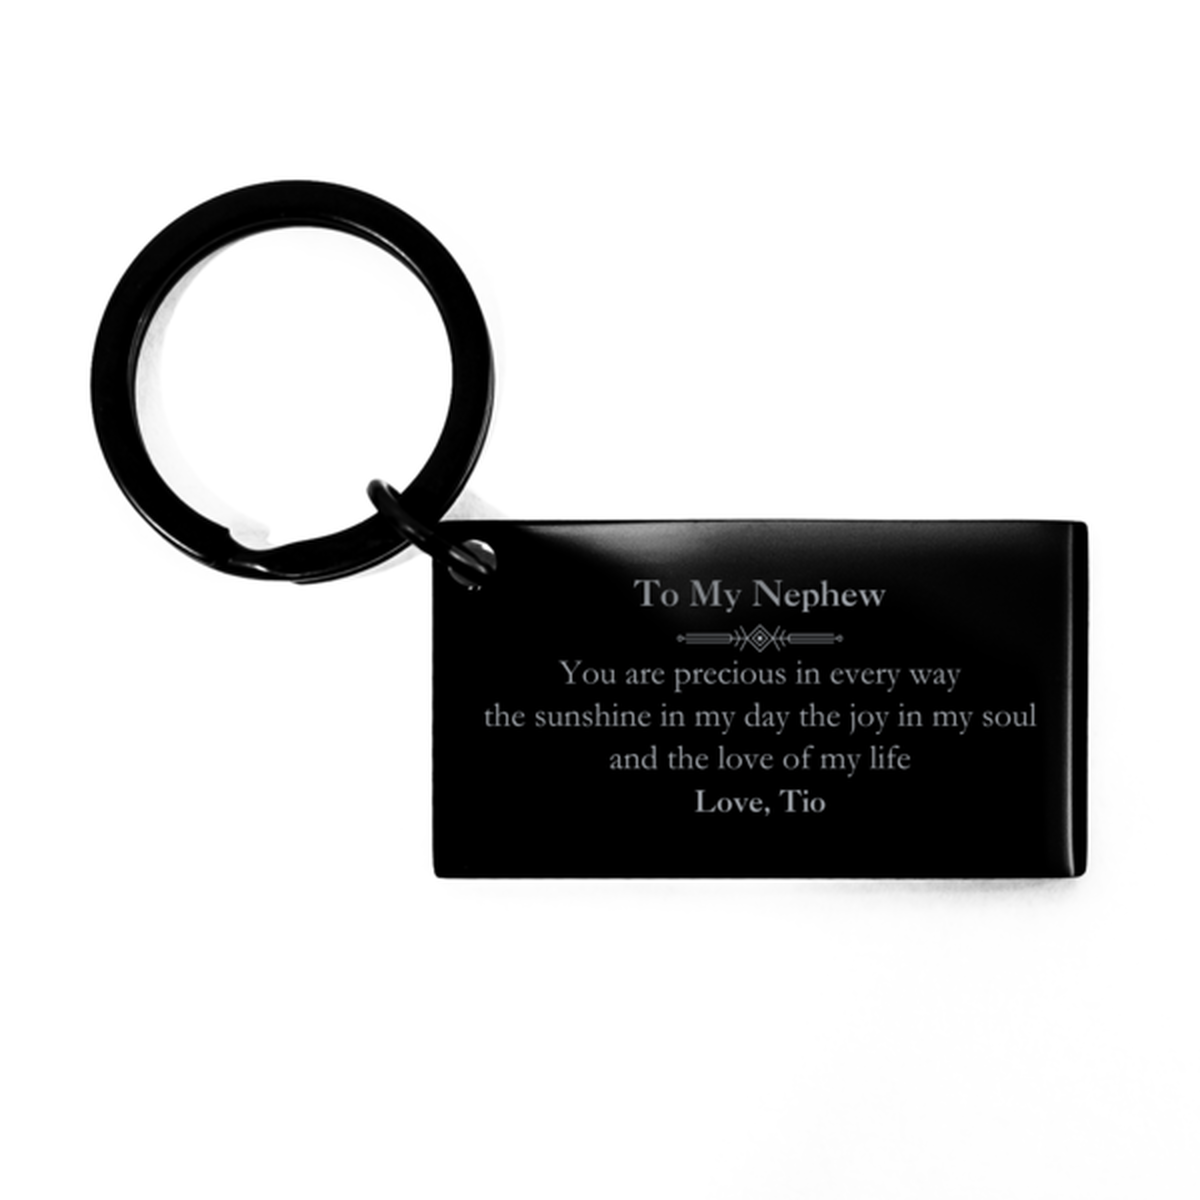 Graduation Gifts for Nephew Keychain Present from Tio, Christmas Nephew Birthday Gifts Nephew You are precious in every way the sunshine in my day. Love, Tio